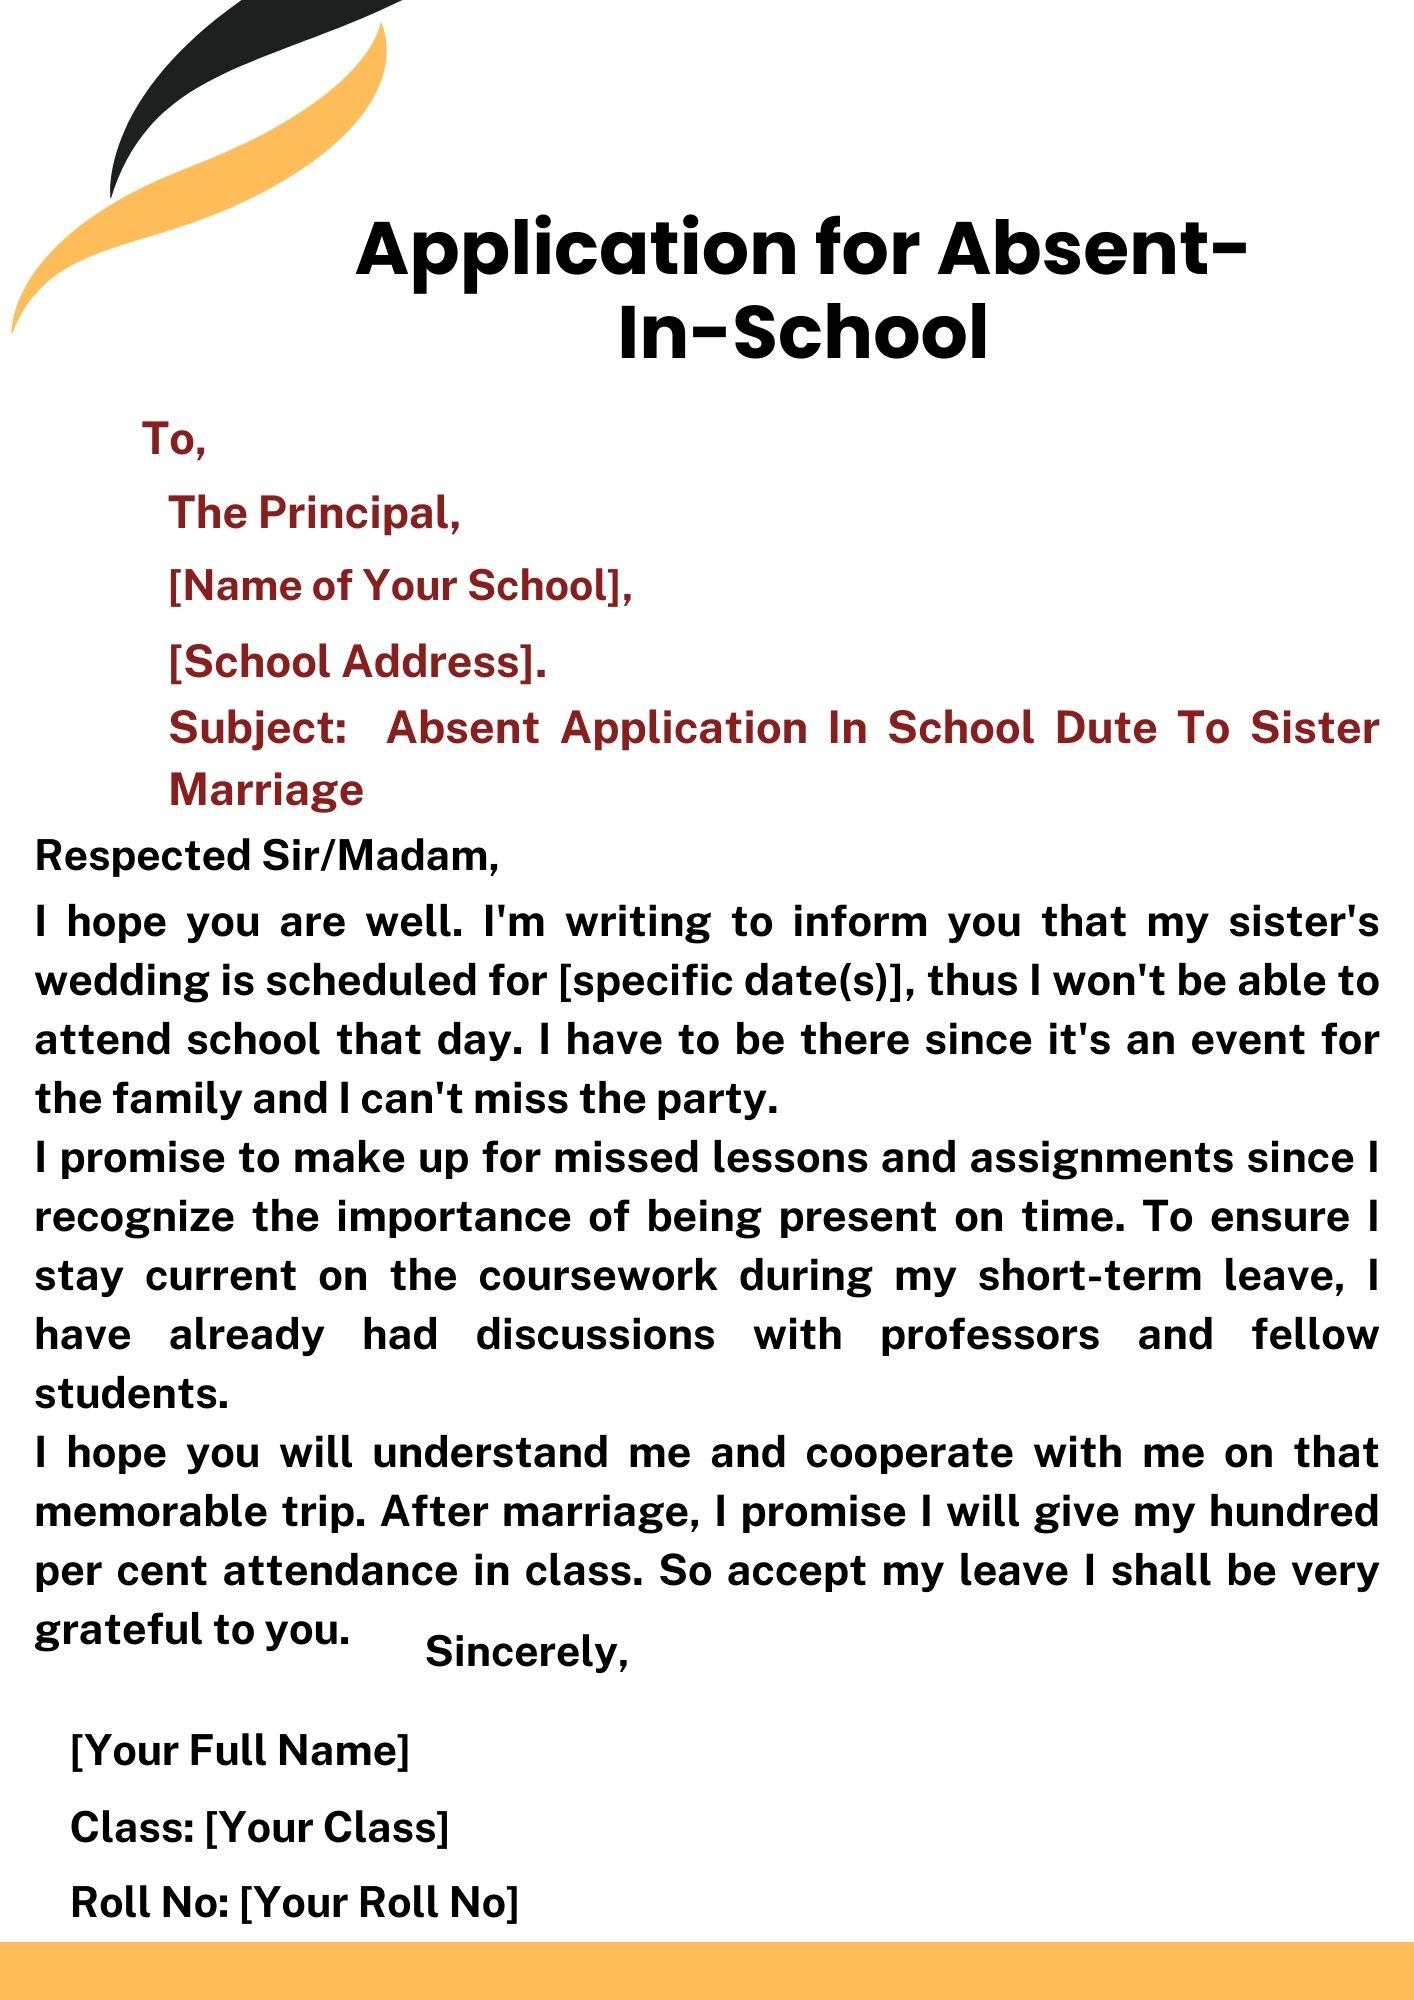   Absent Application In School Due To Sister Marriage